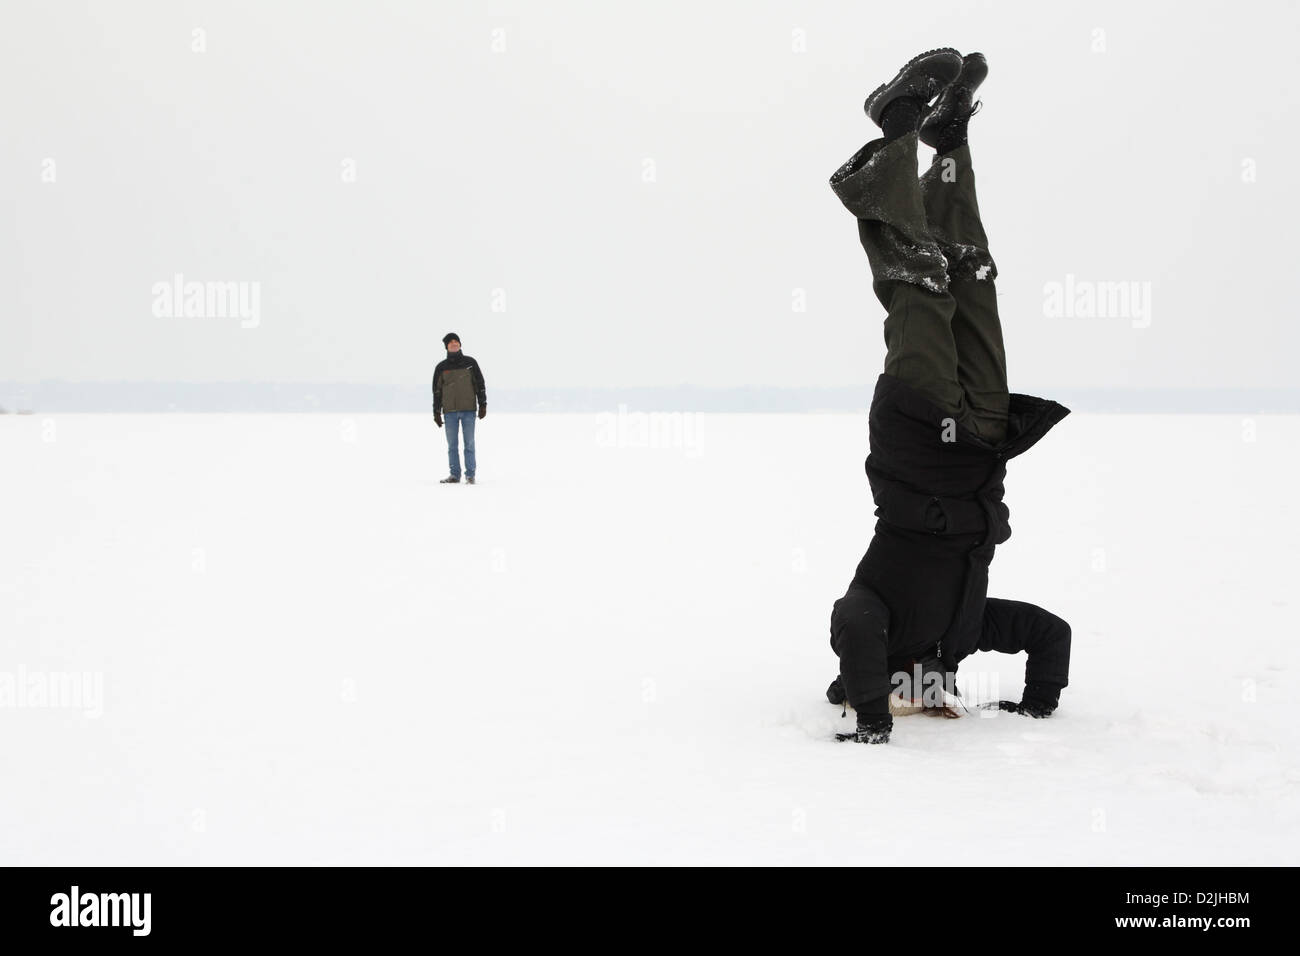 Berlin, Germany, woman doing a headstand in snow Stock Photo